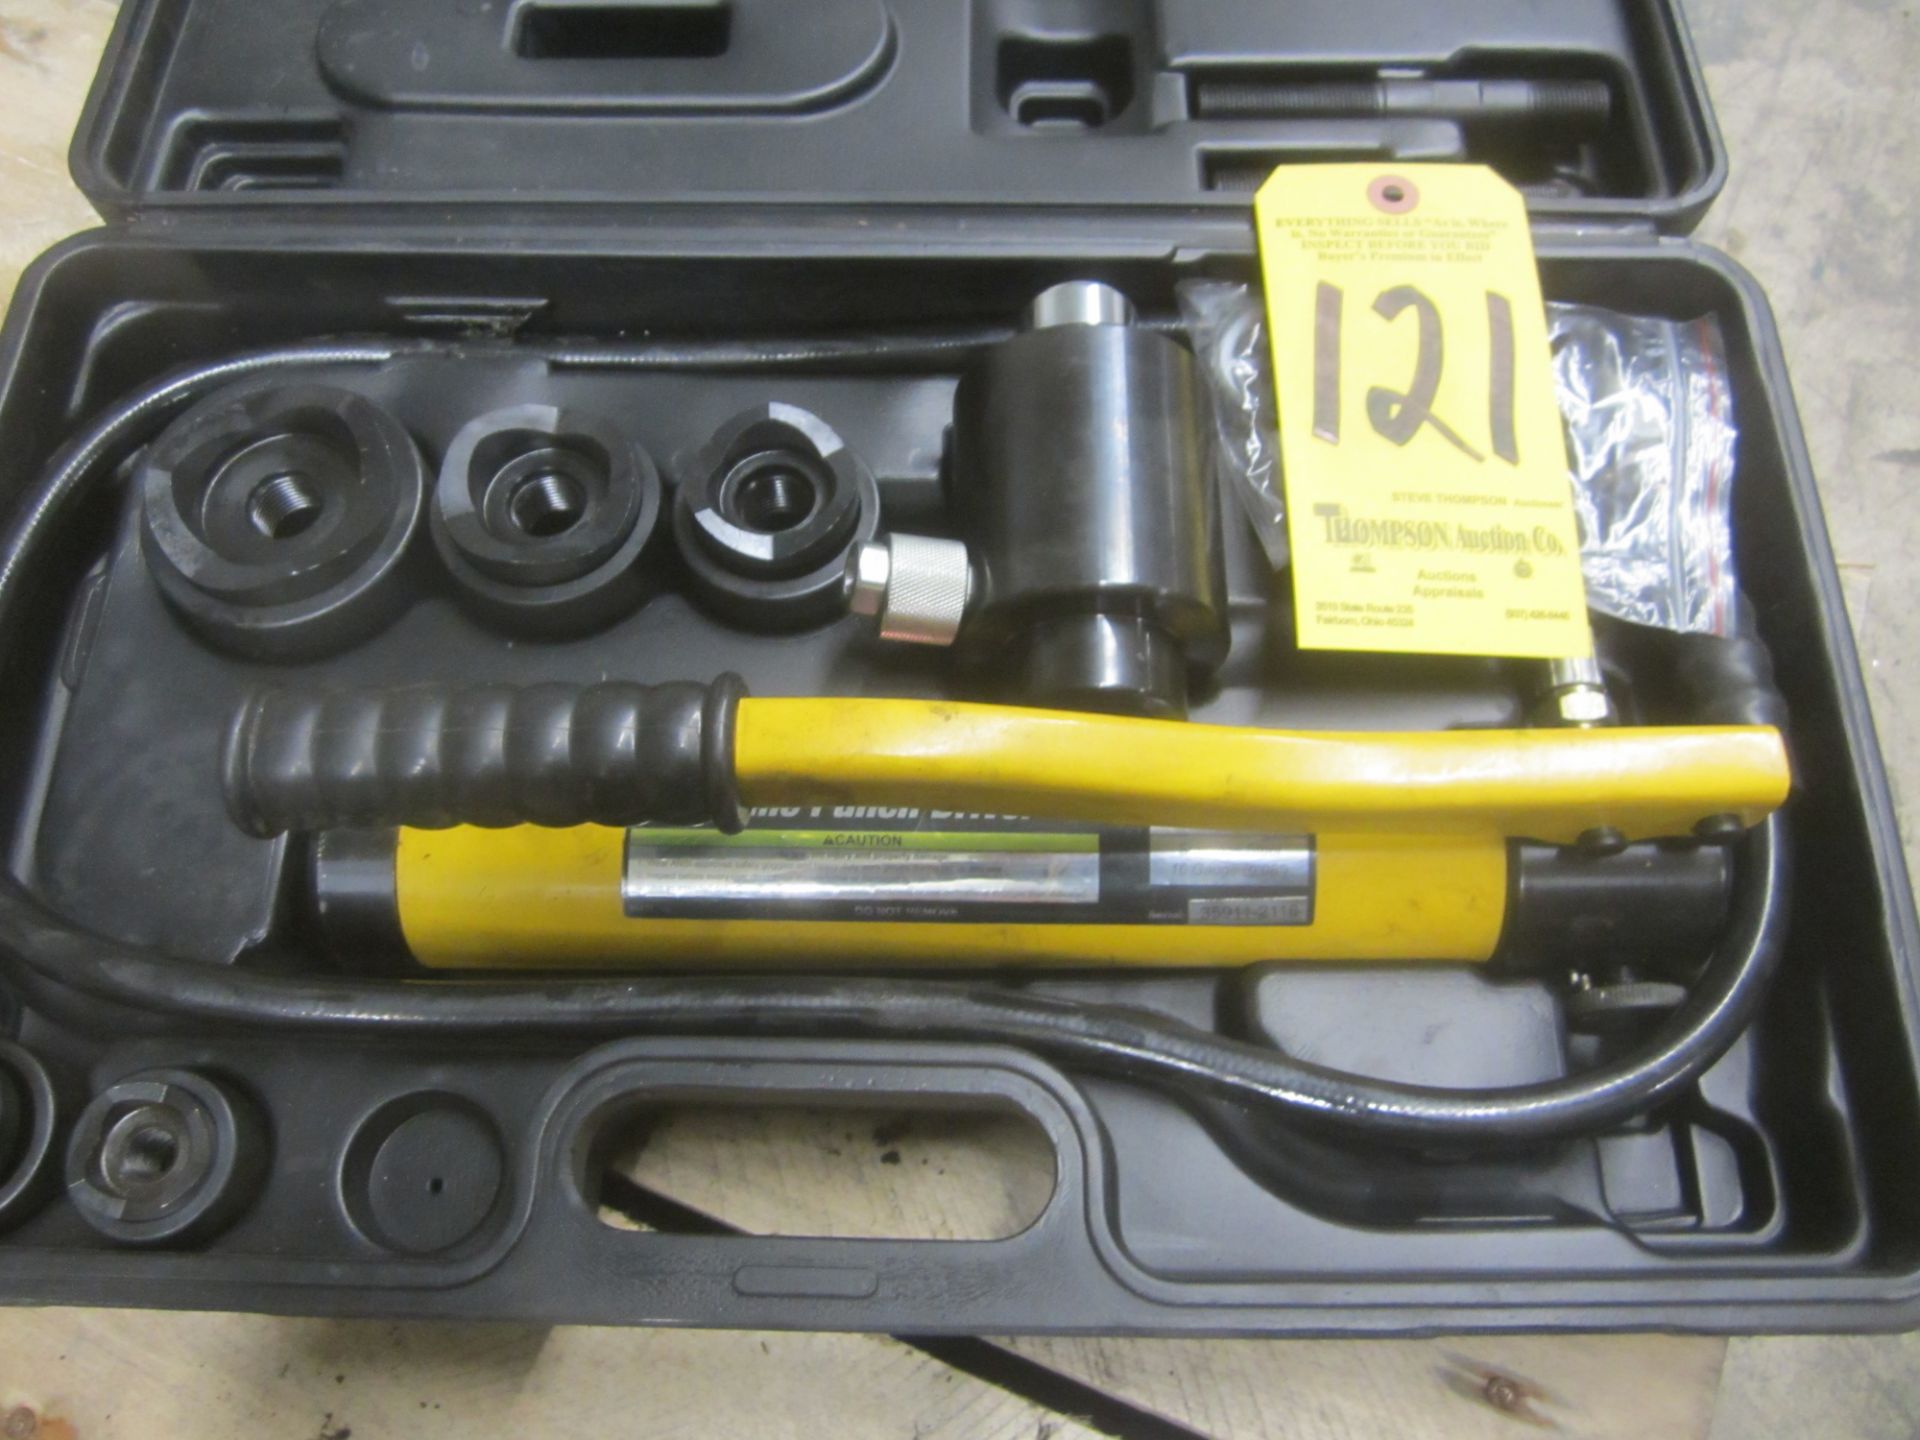 Pittisburgh Hydraulic Knock Out Punch Kit